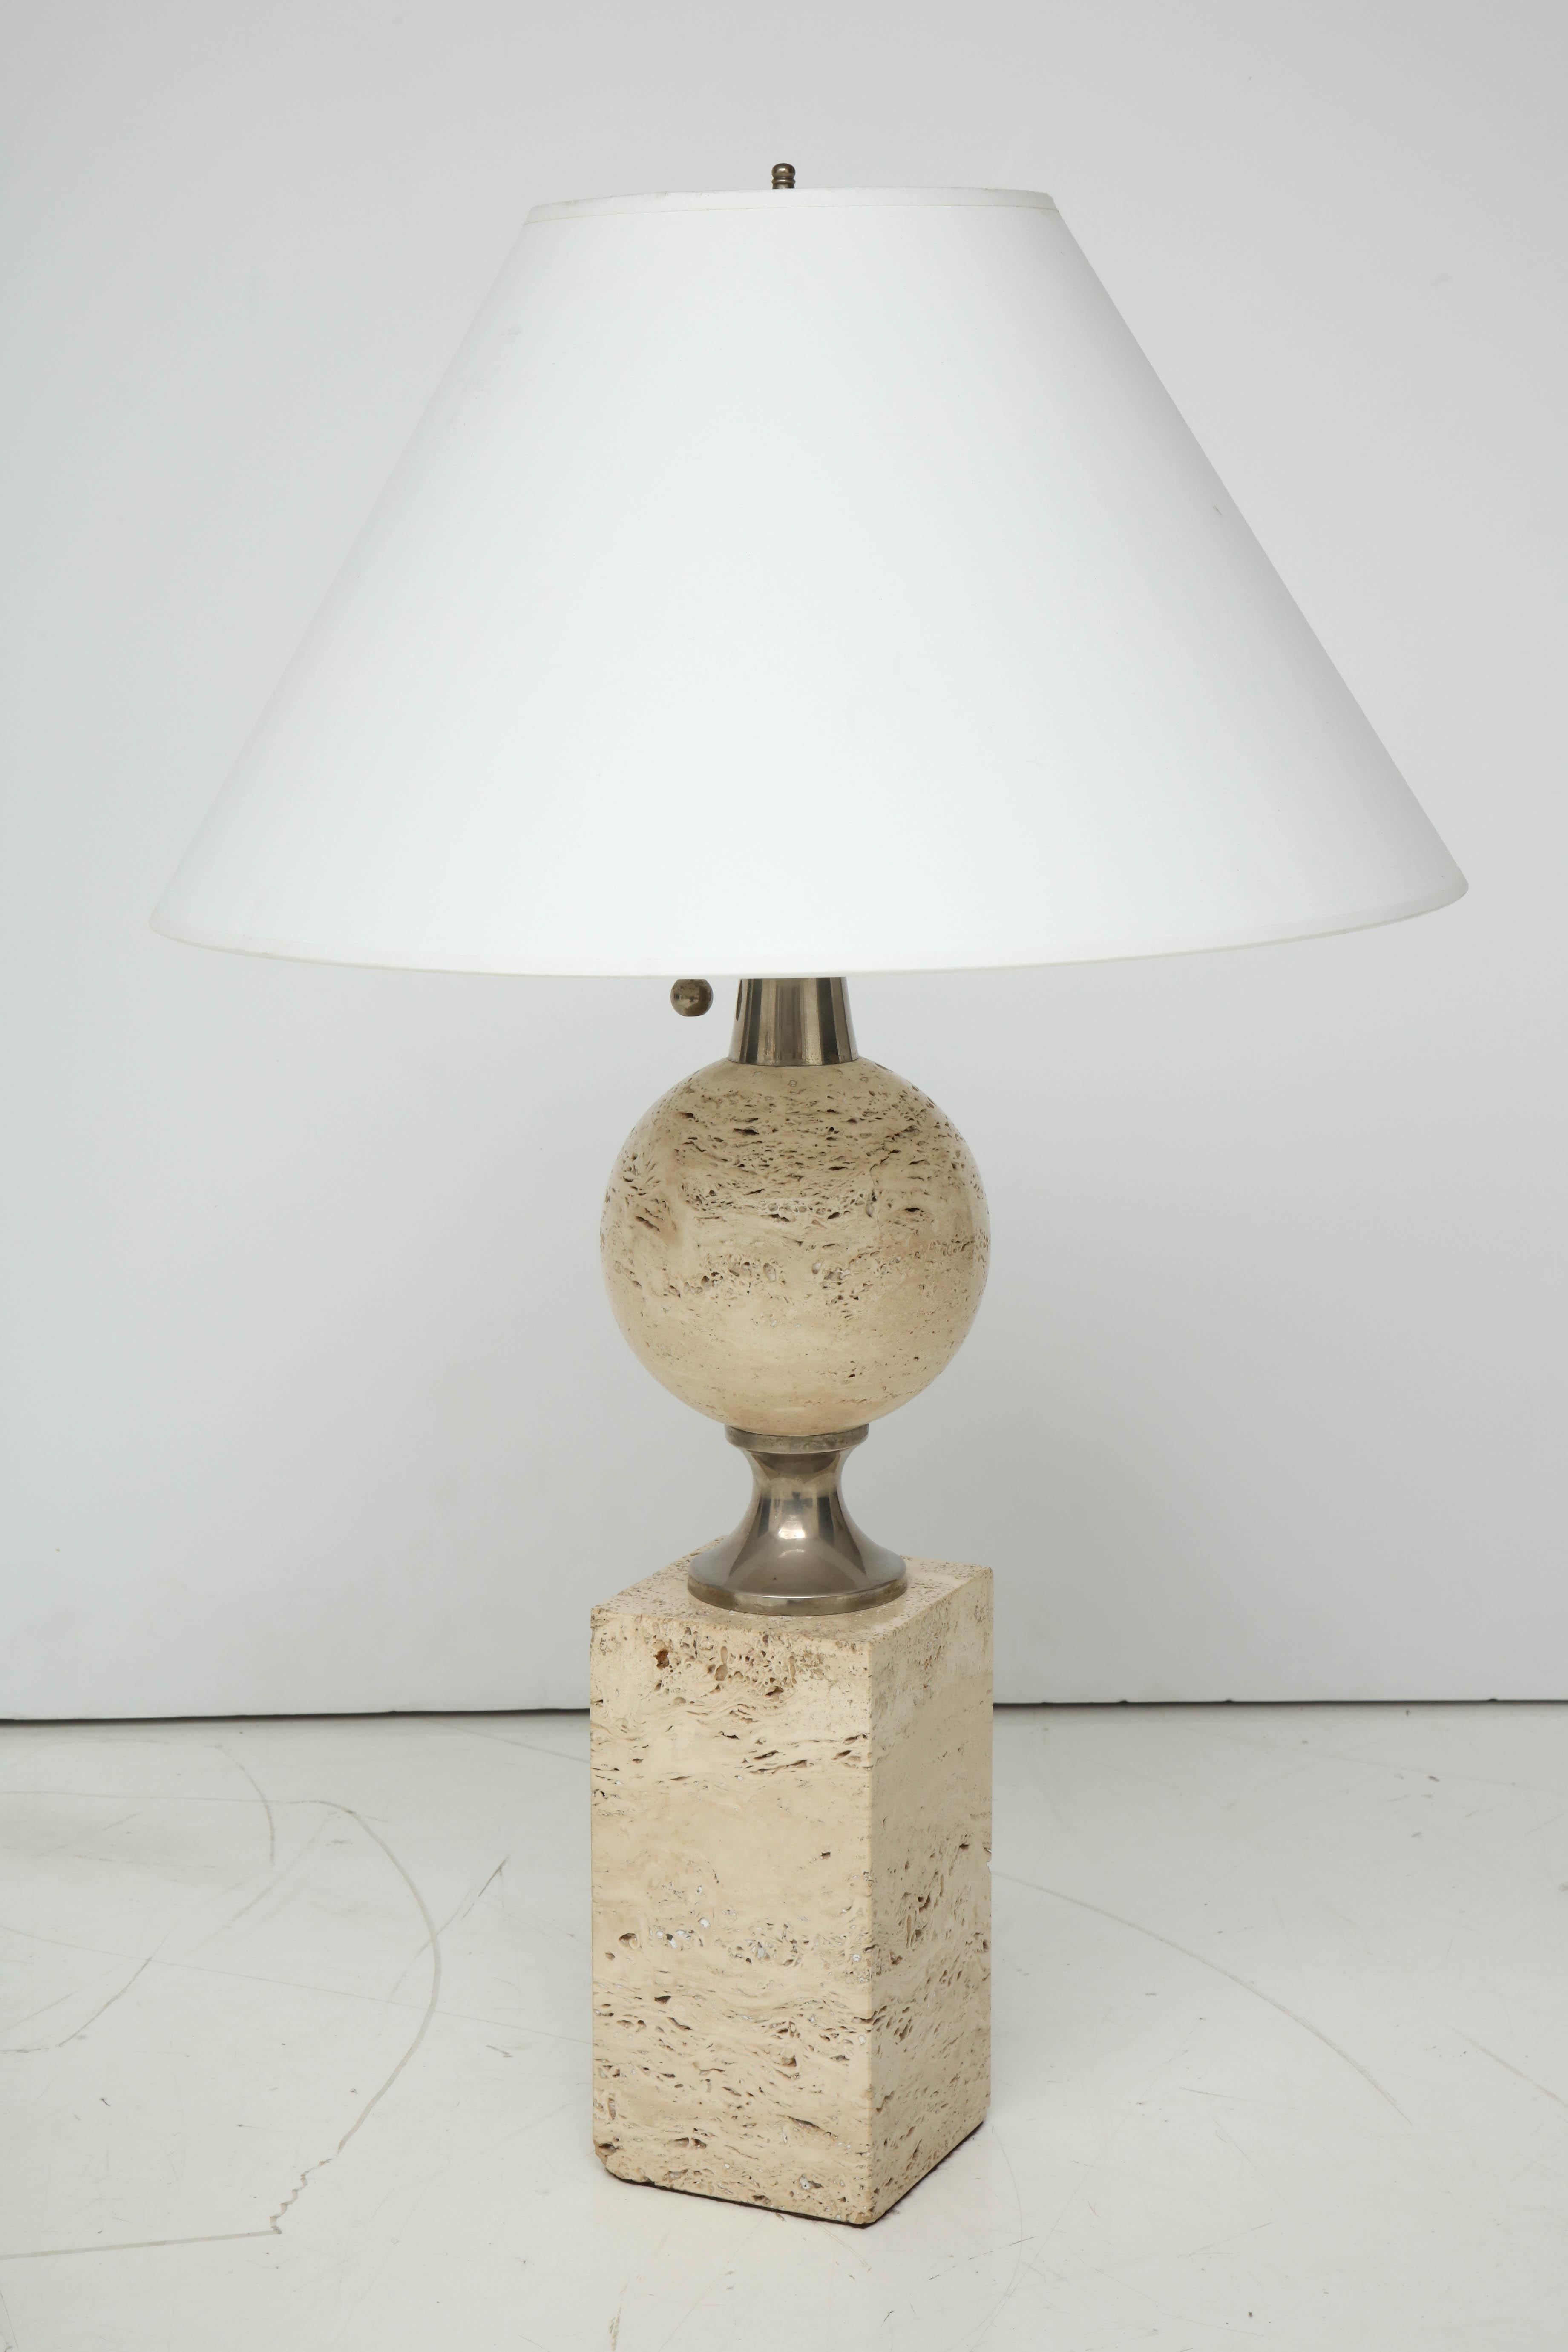 Mid-20th century travertine lamp, ball shaped centre on square base with polished chrome rod.